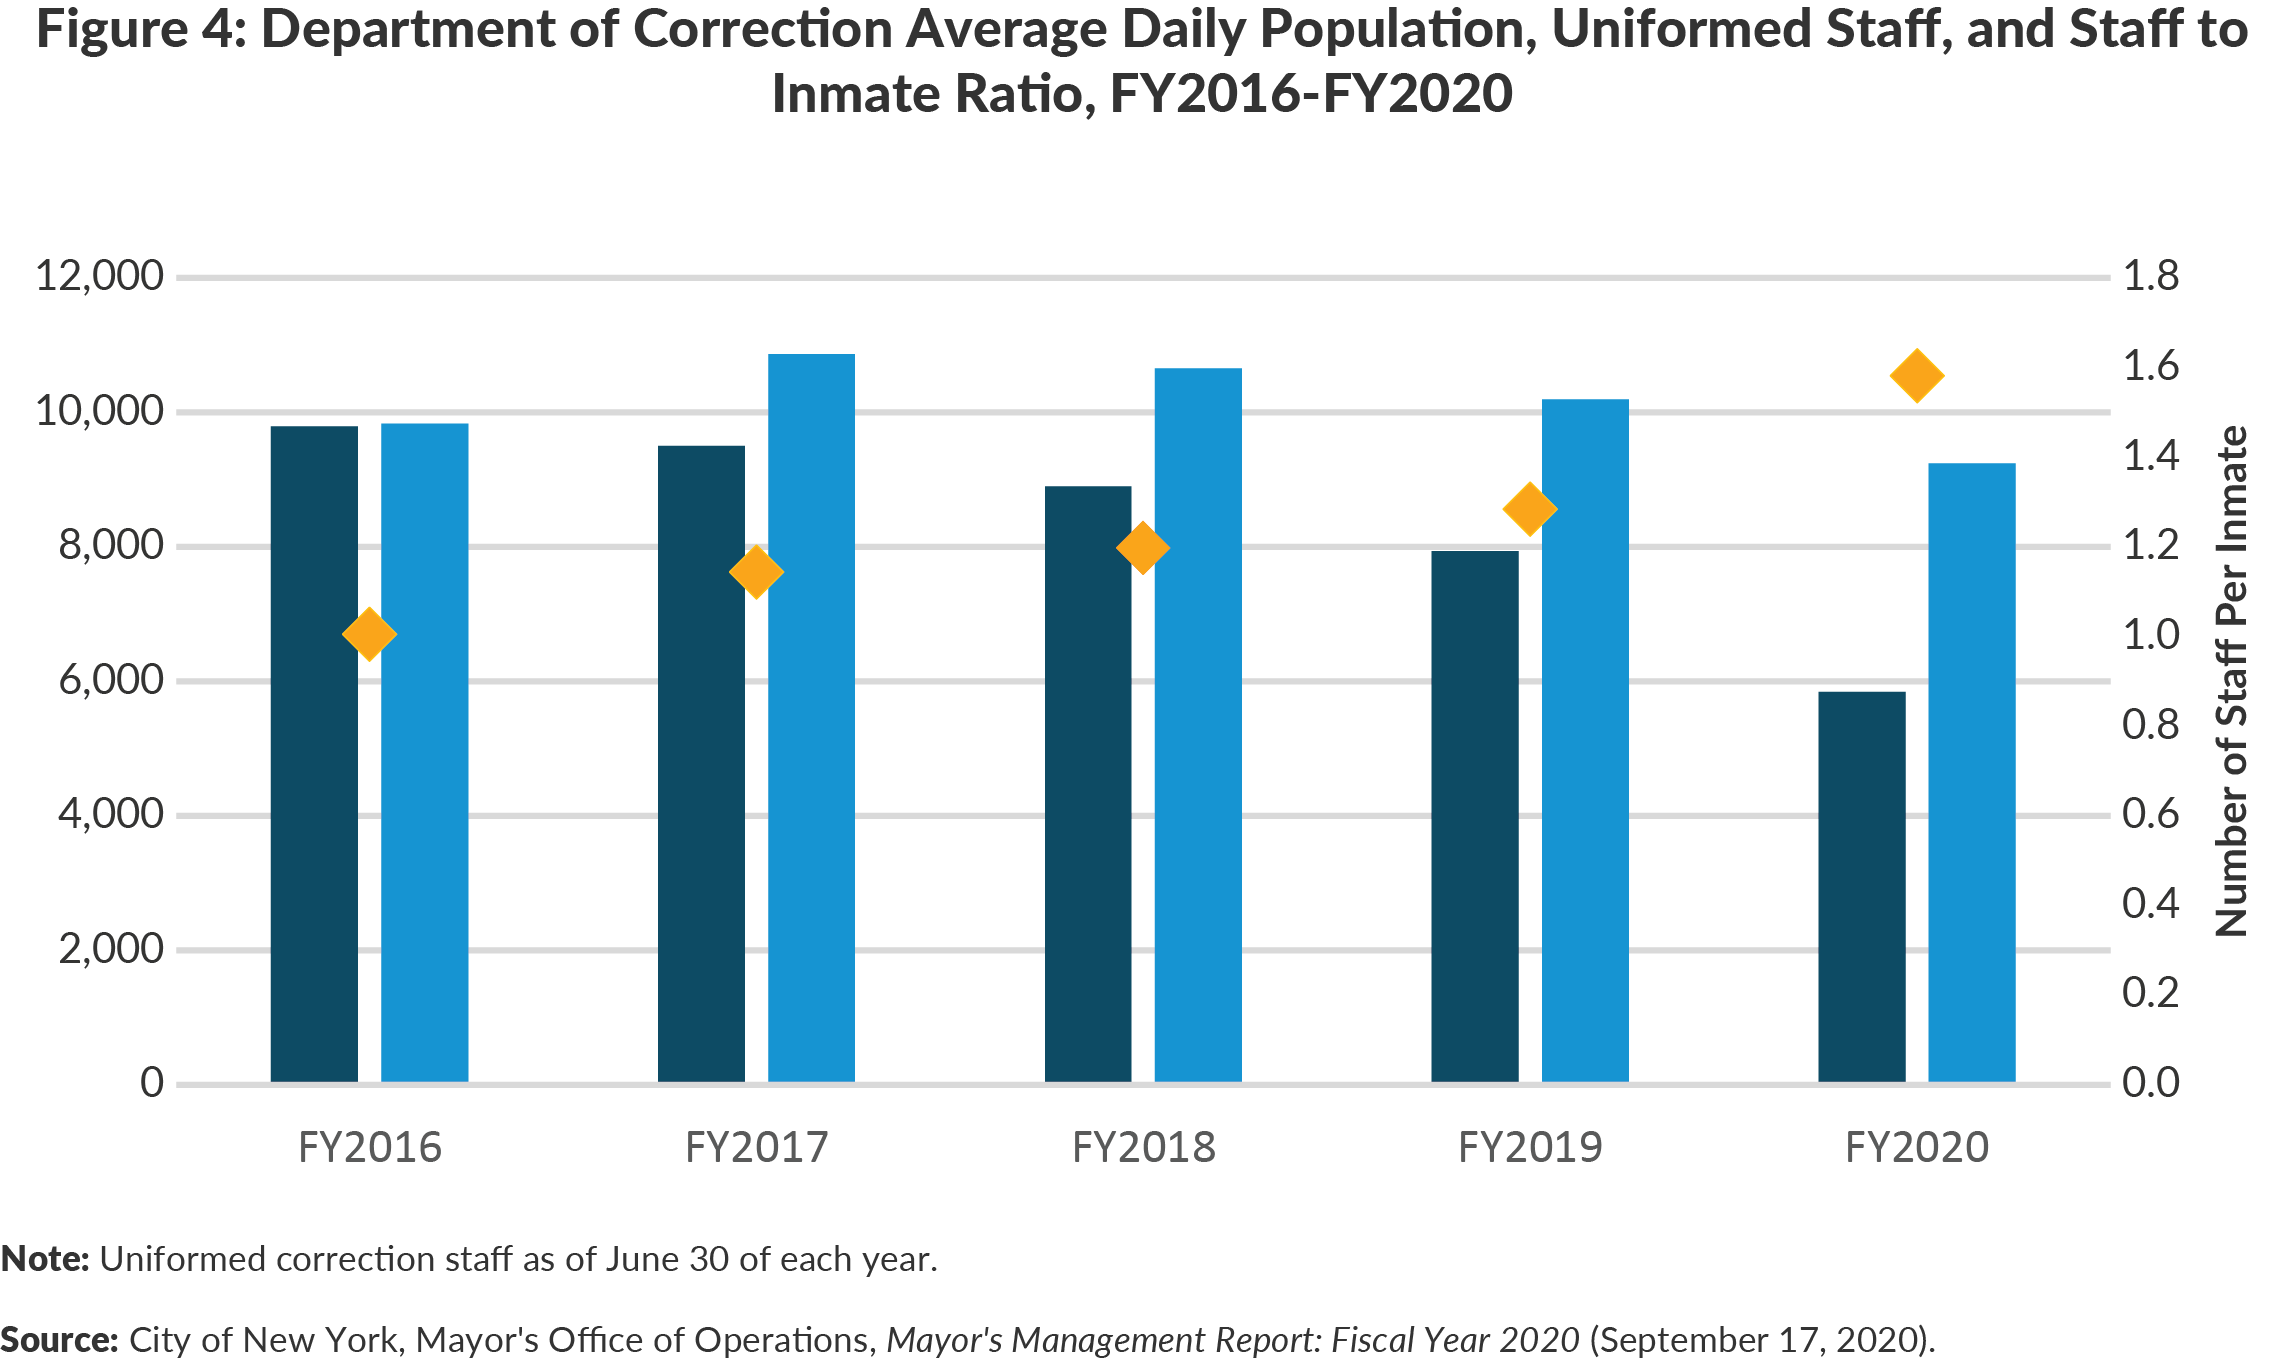 Figure 4: Department of Correction Average Daily Population, Uniformed Staff, and Staff to Inmate Ratio, FY2016-FY2020